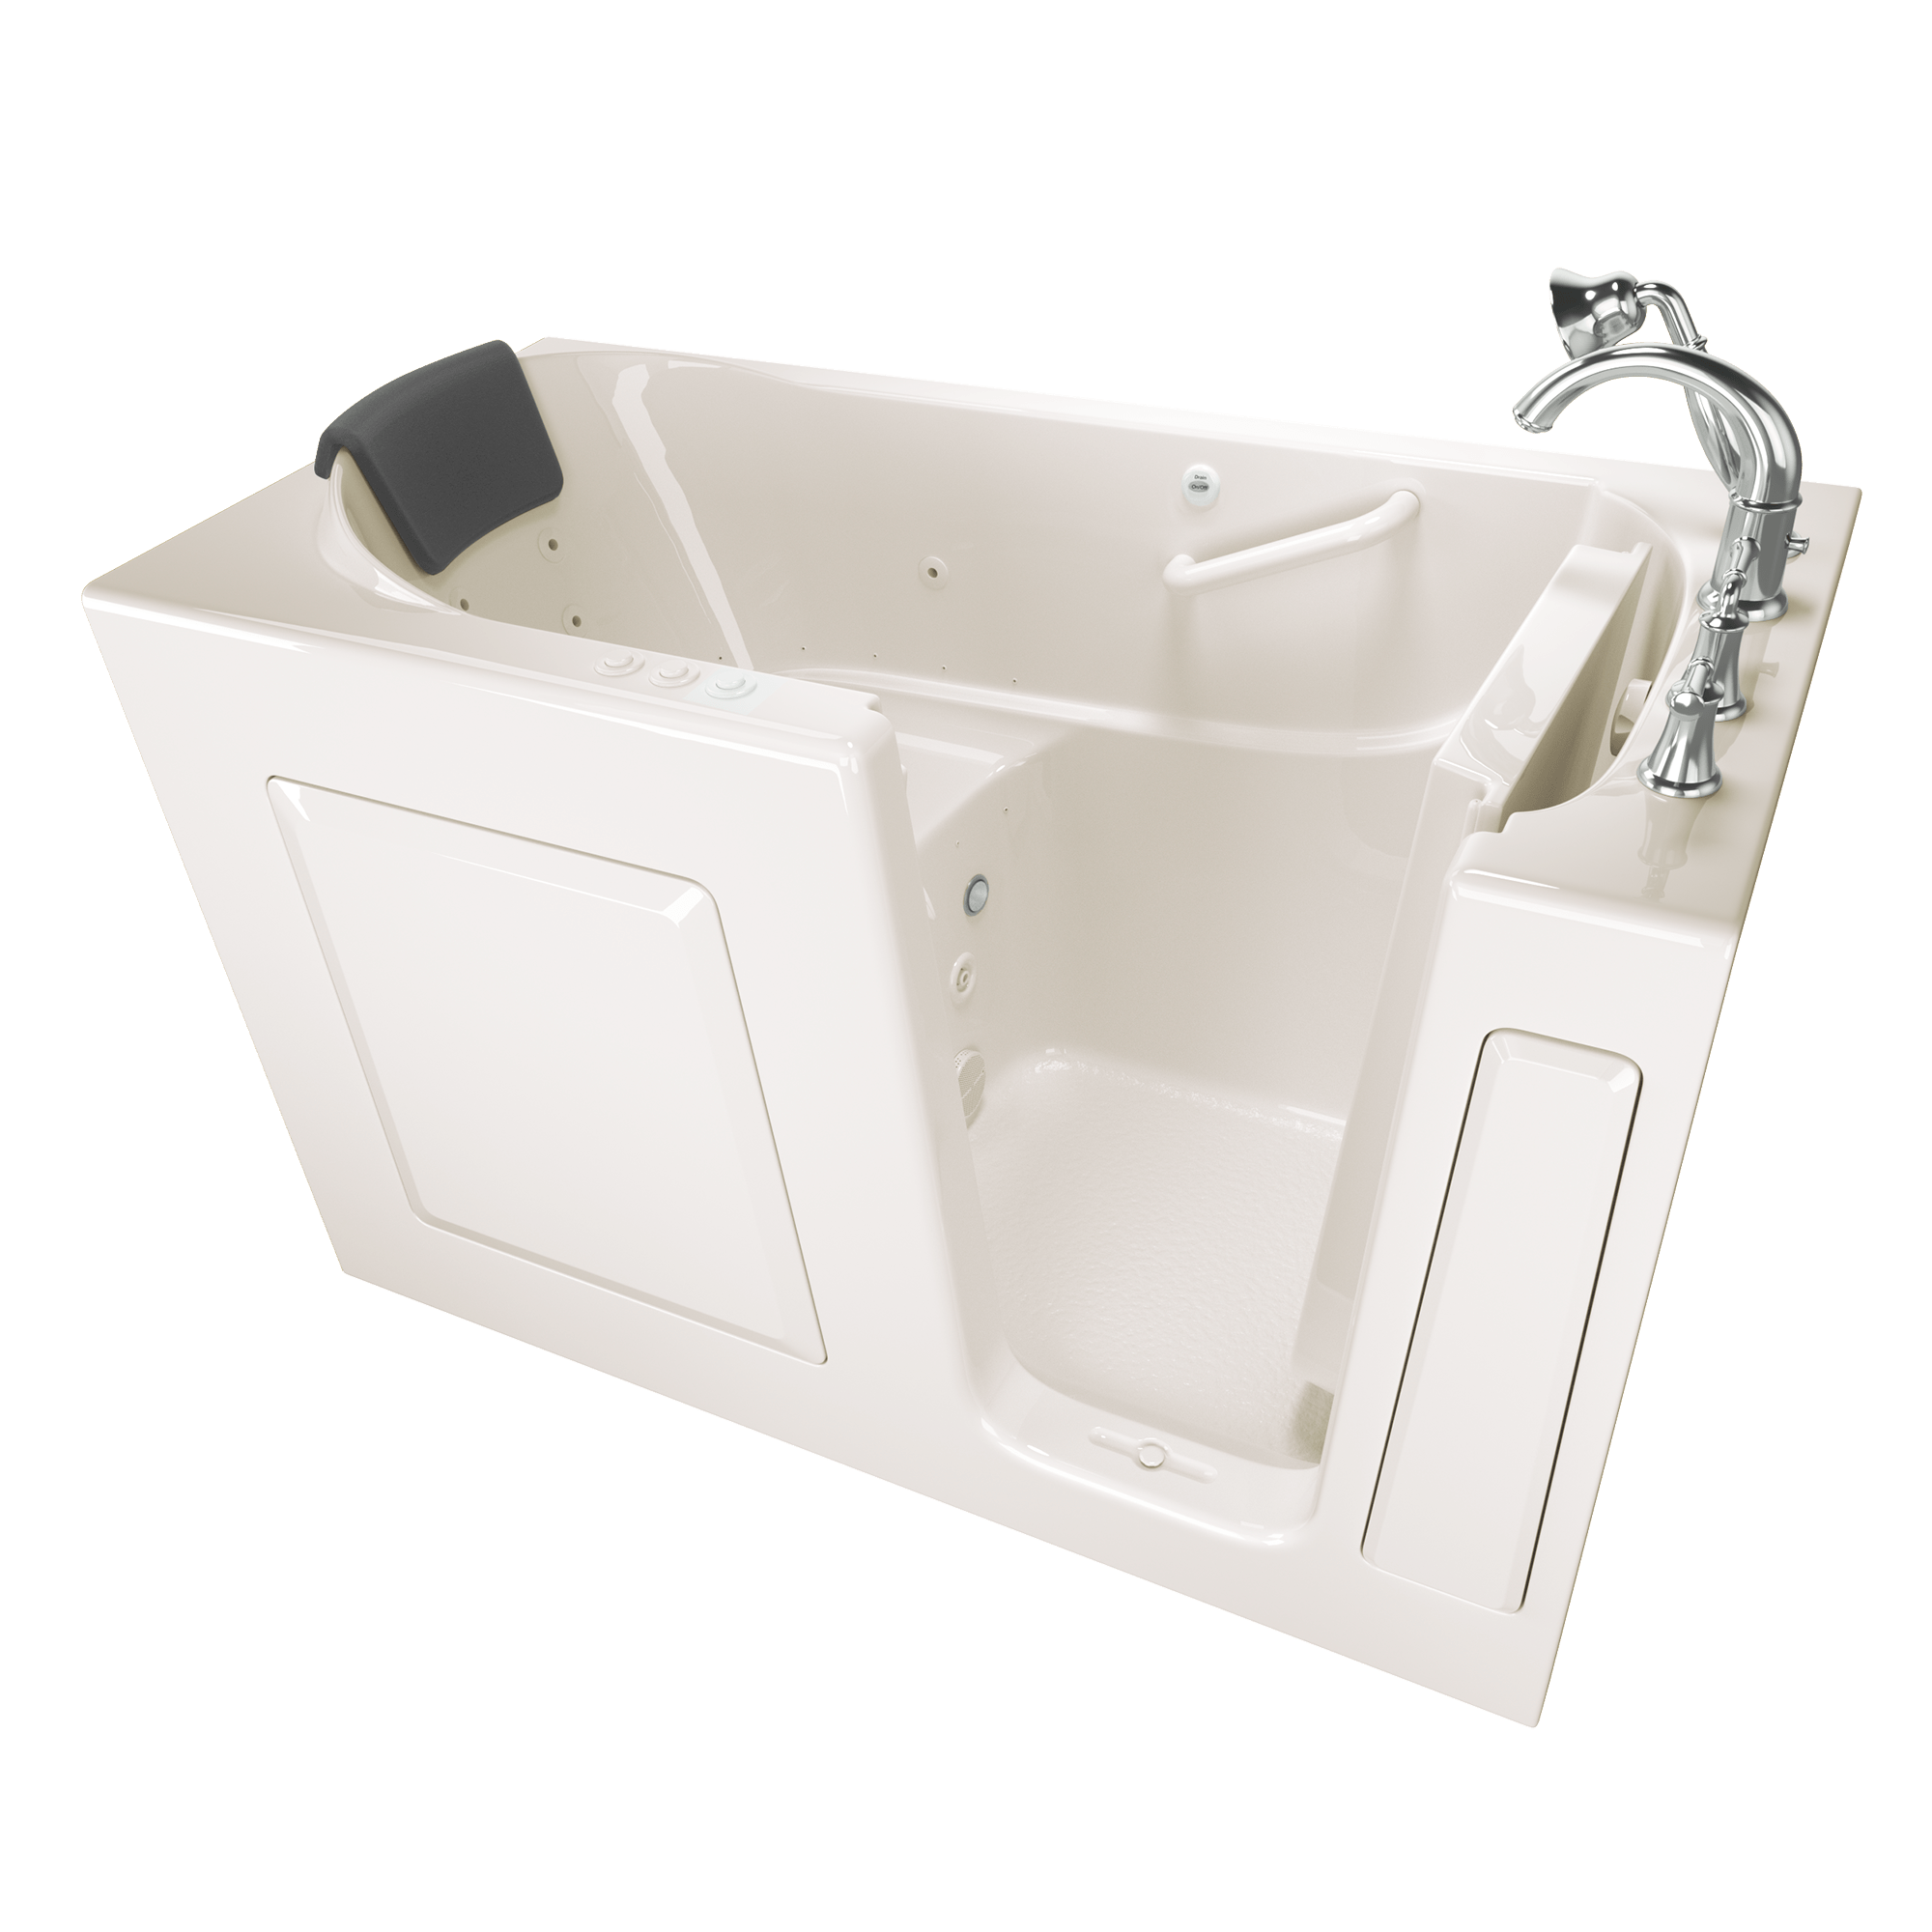 Gelcoat Premium Series 60x30 Inch Walk-In Bathtub with Dual Air Massage and Jet Massage System - Right Hand Door and Drain